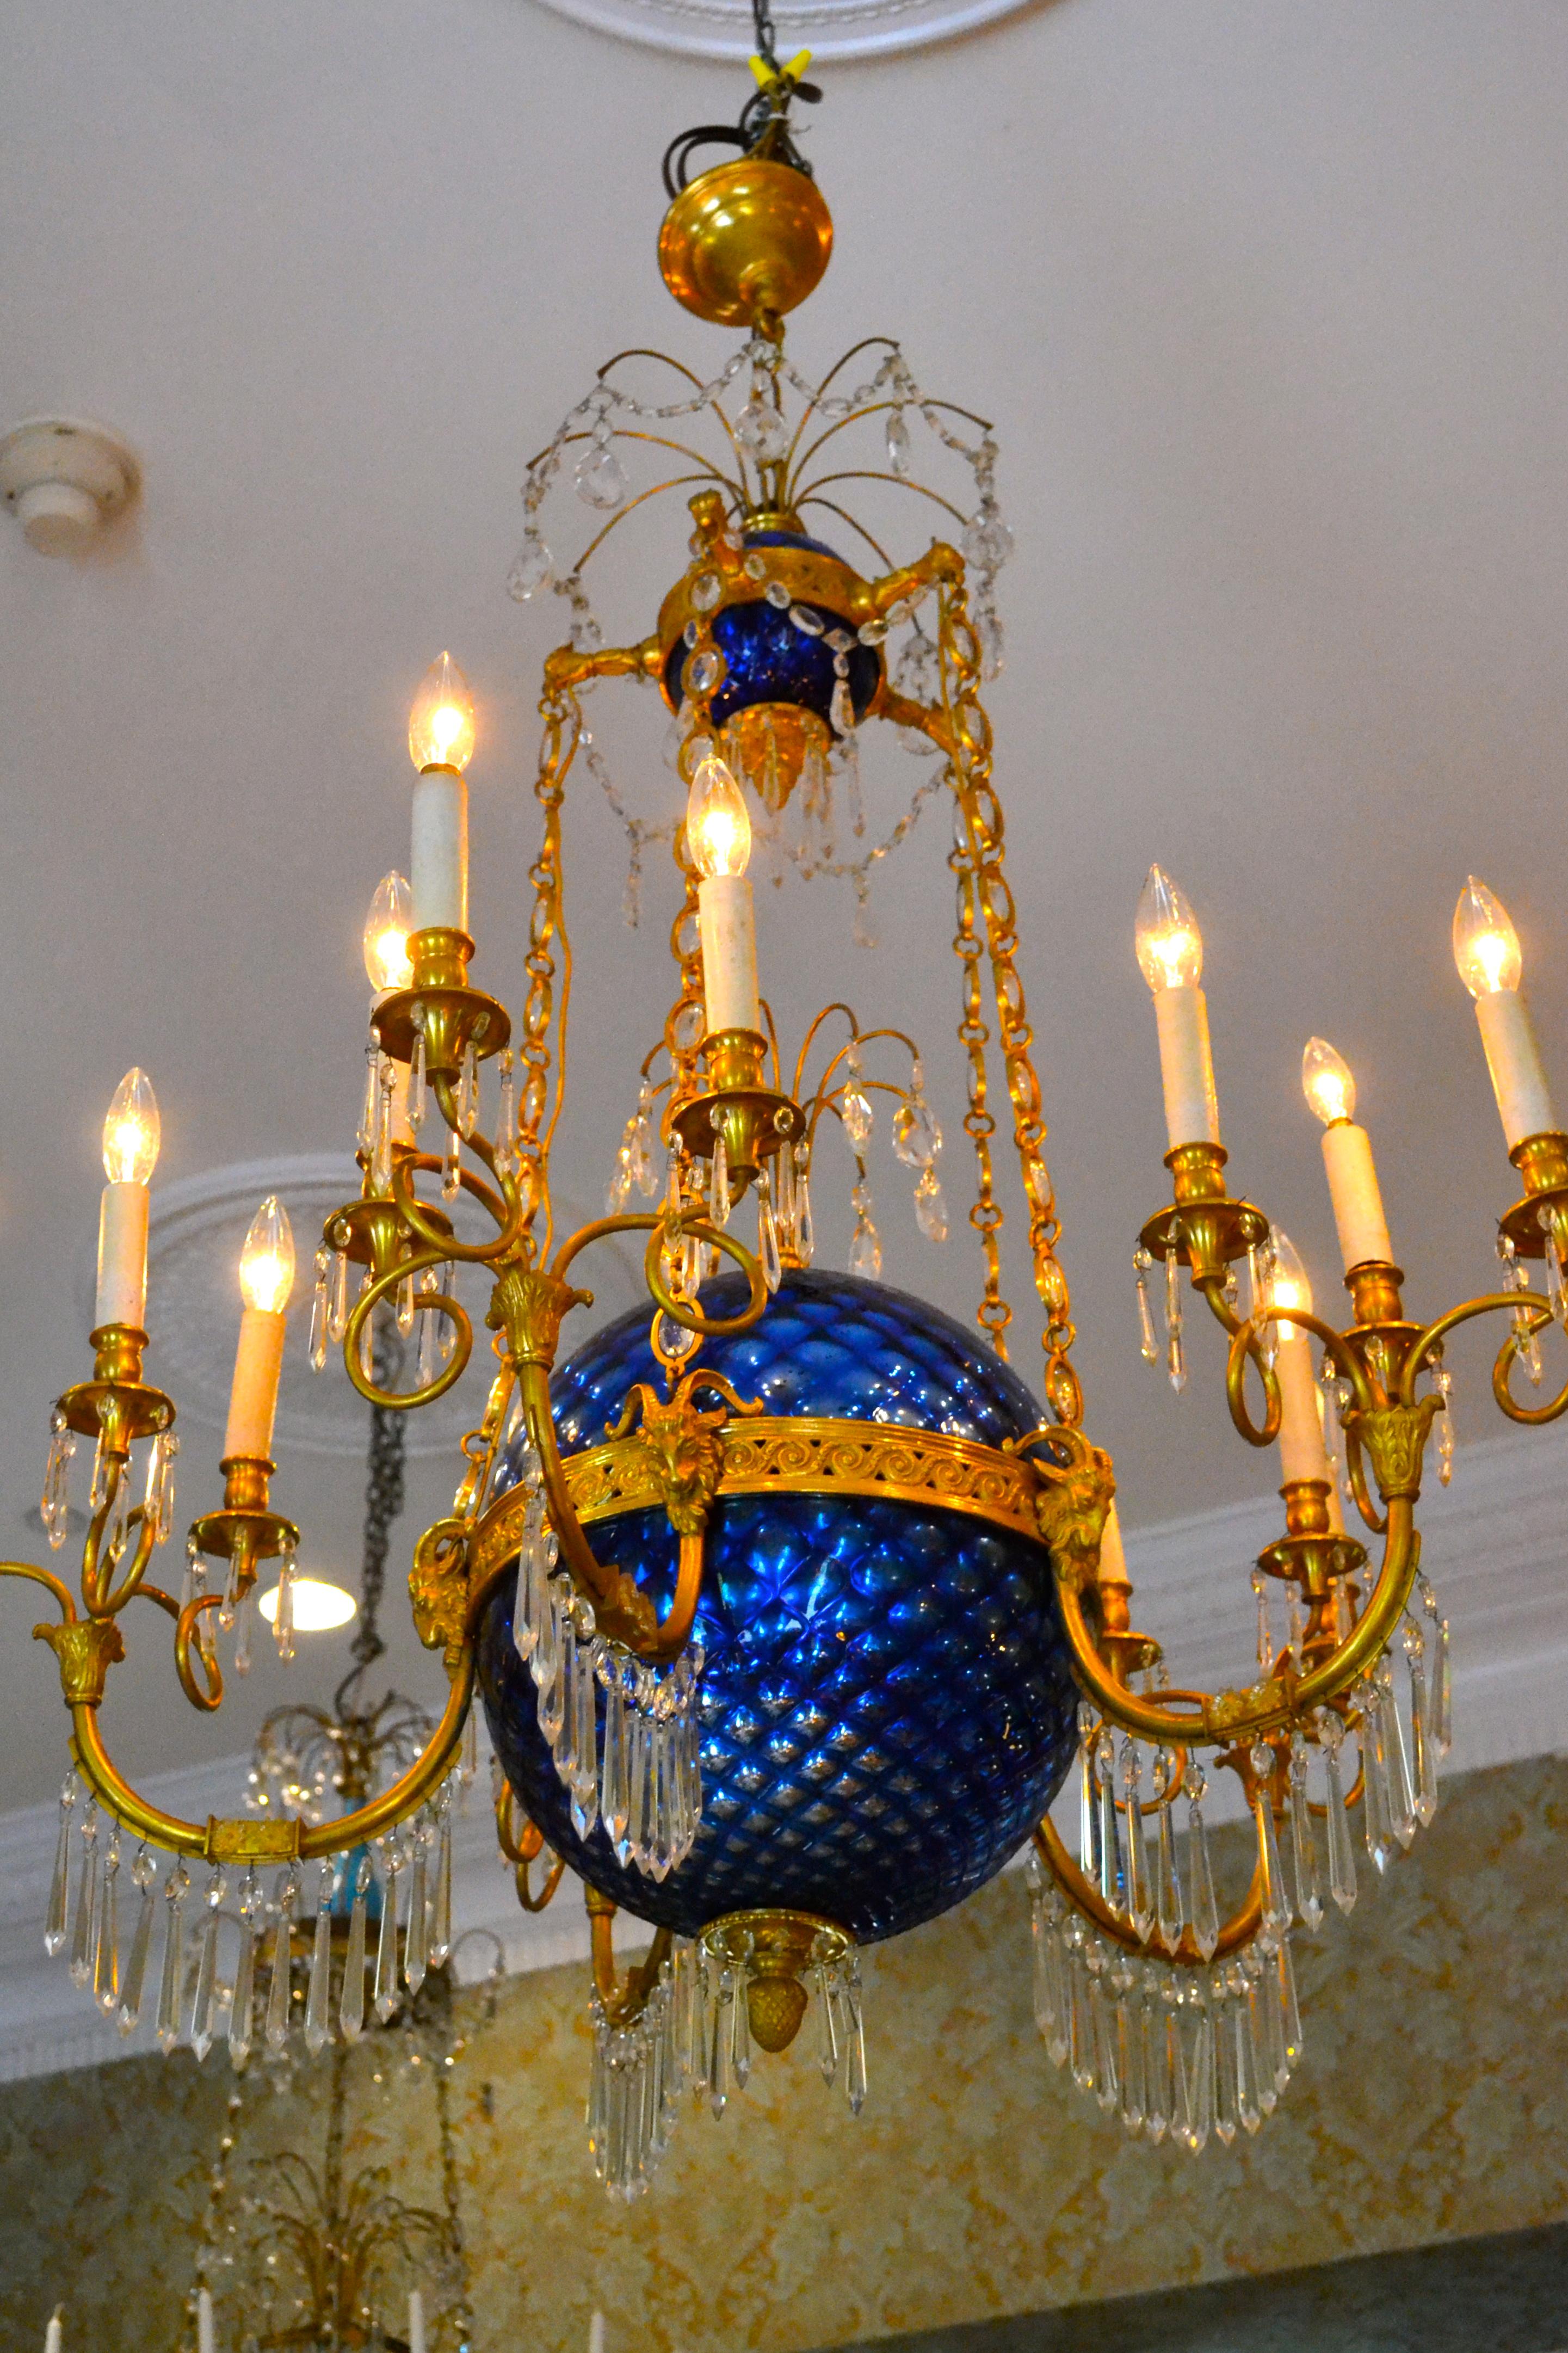 A Russian influenced  crystal and gilt bronze chandelier styled from the early 19th century Empire period, this chandelier likely dating from the early 20th century. Five bronze and crystal chains support a large round blue mercury glass bowl, from